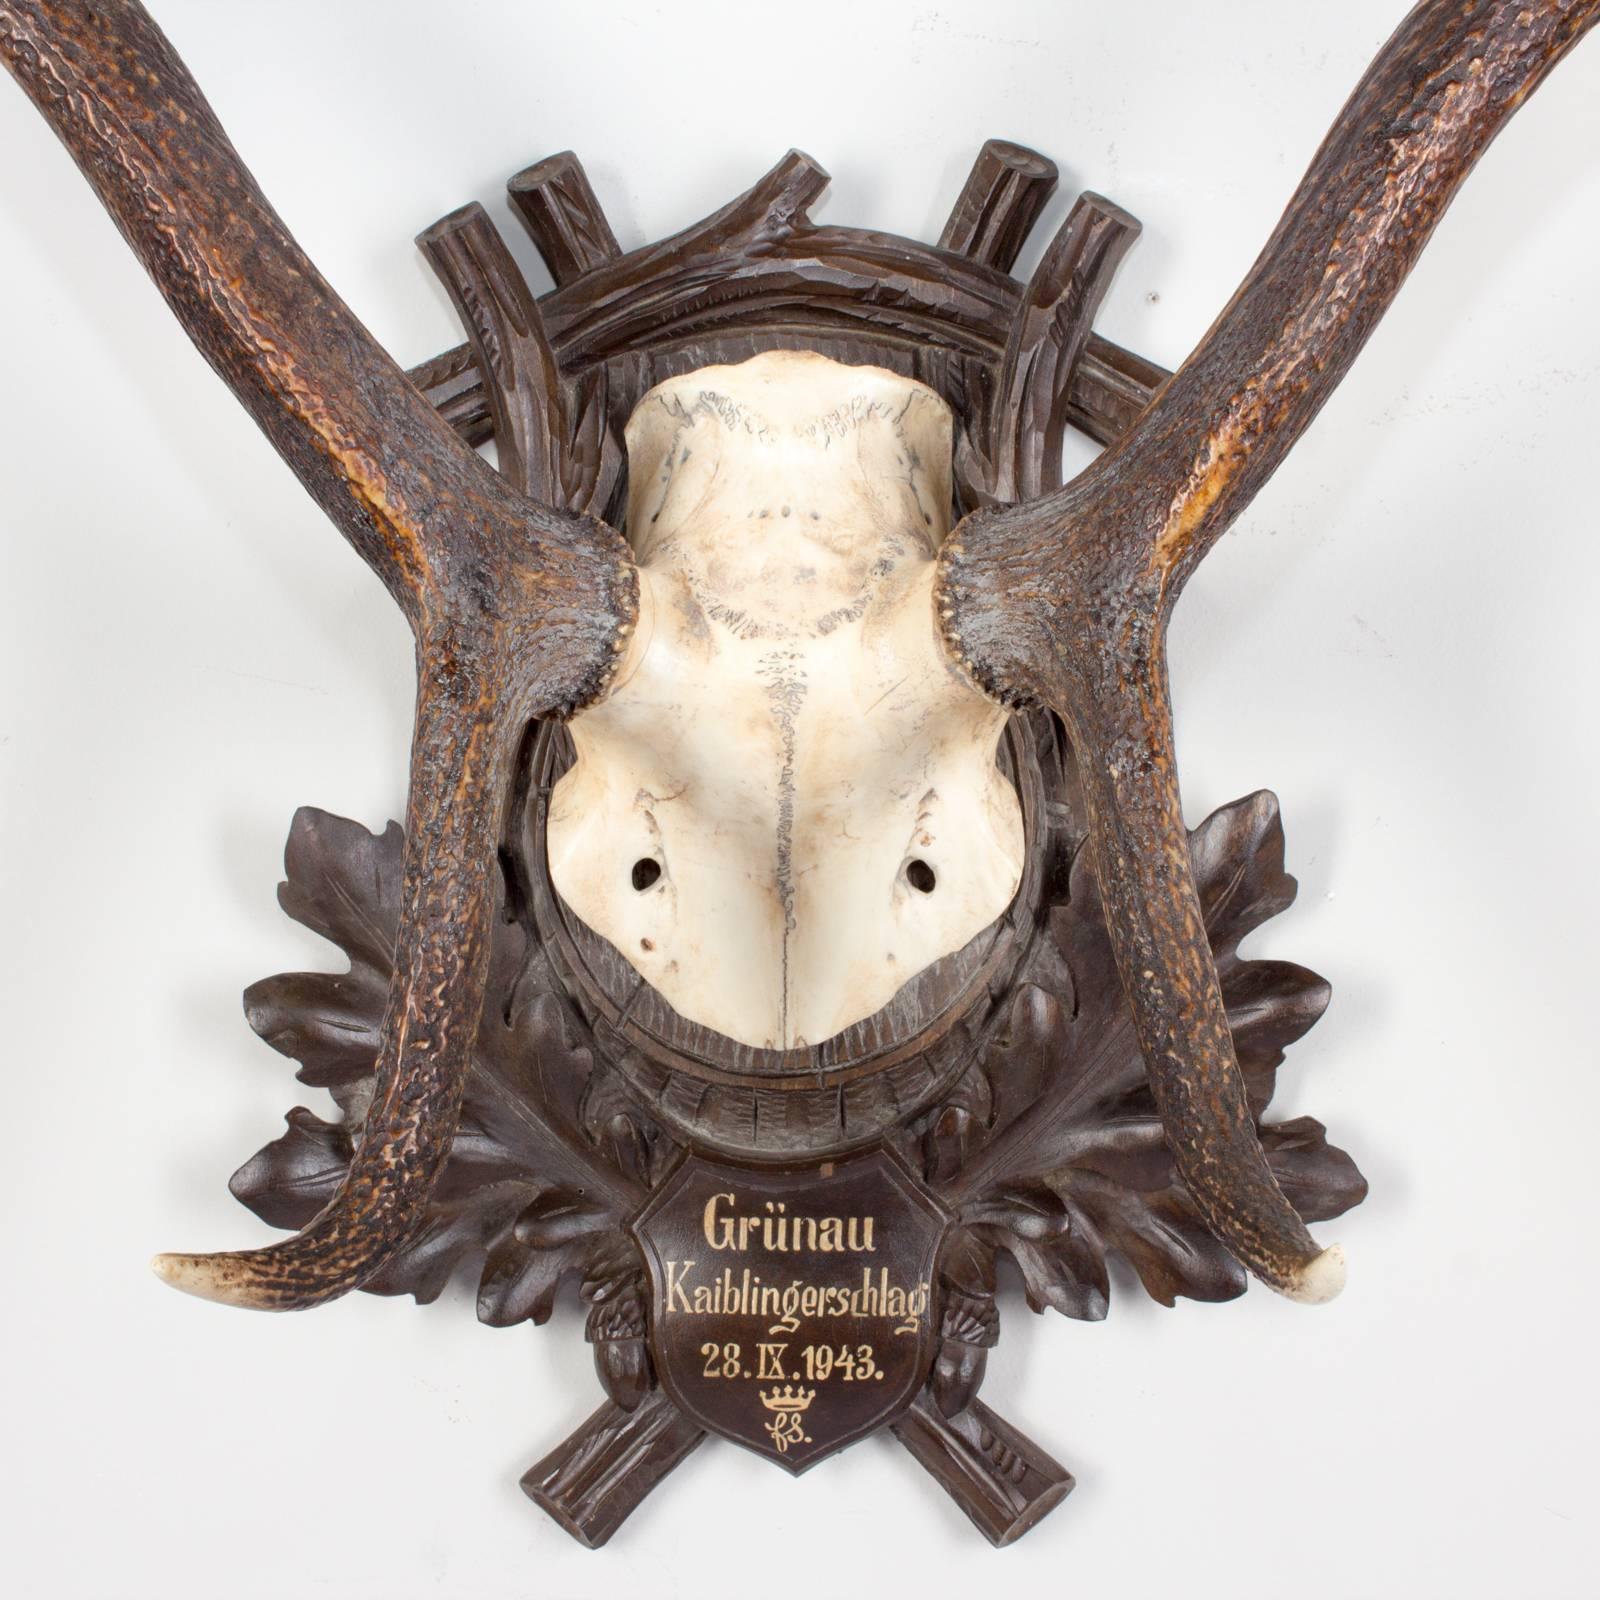 This is a half-cap red stag trophy mounted on an original Black Forest plaque featuring hand-painted writing on the plaque. The writing reads 